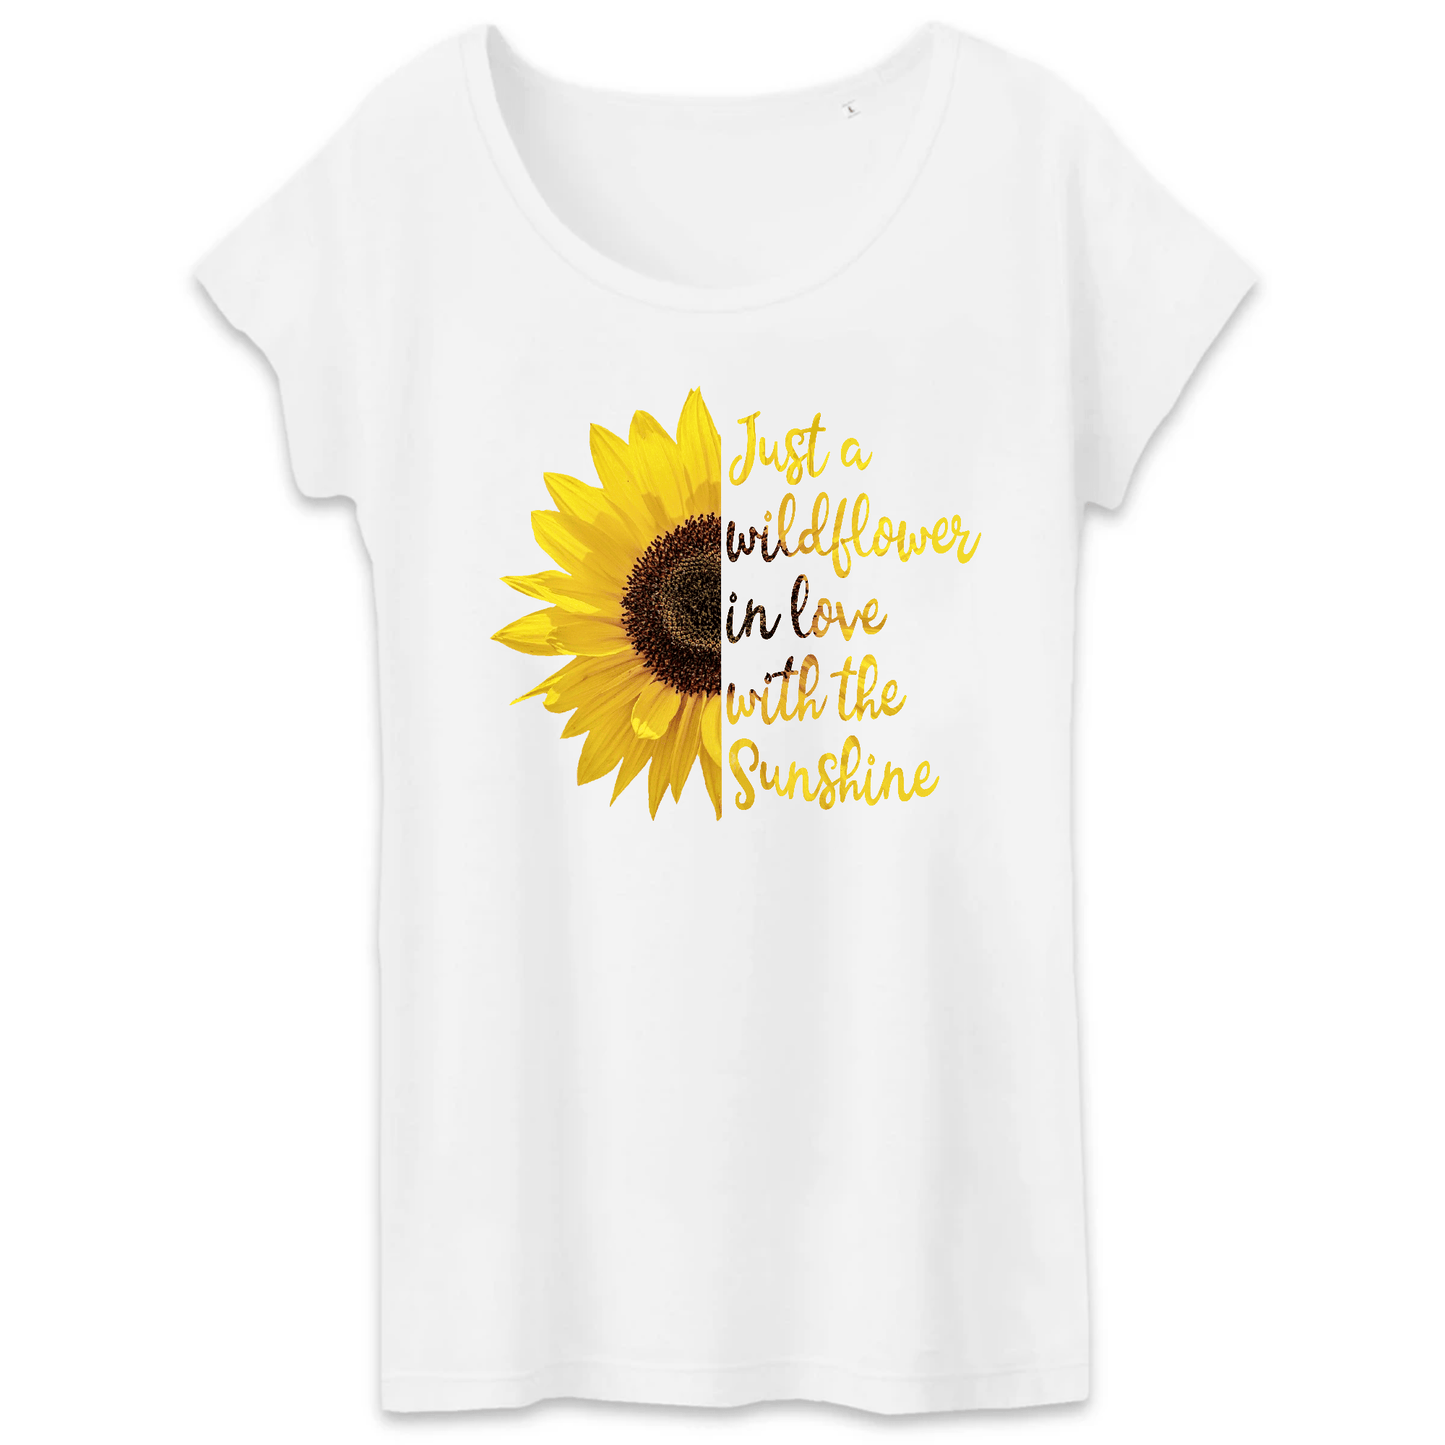 Wildflower in Love with the Sunshine Women's  T-Shirt - 100% Organic Cotton - Premium T-shirt Femme BandC - TW043 - DTG - Shop now at San Rocco Italia